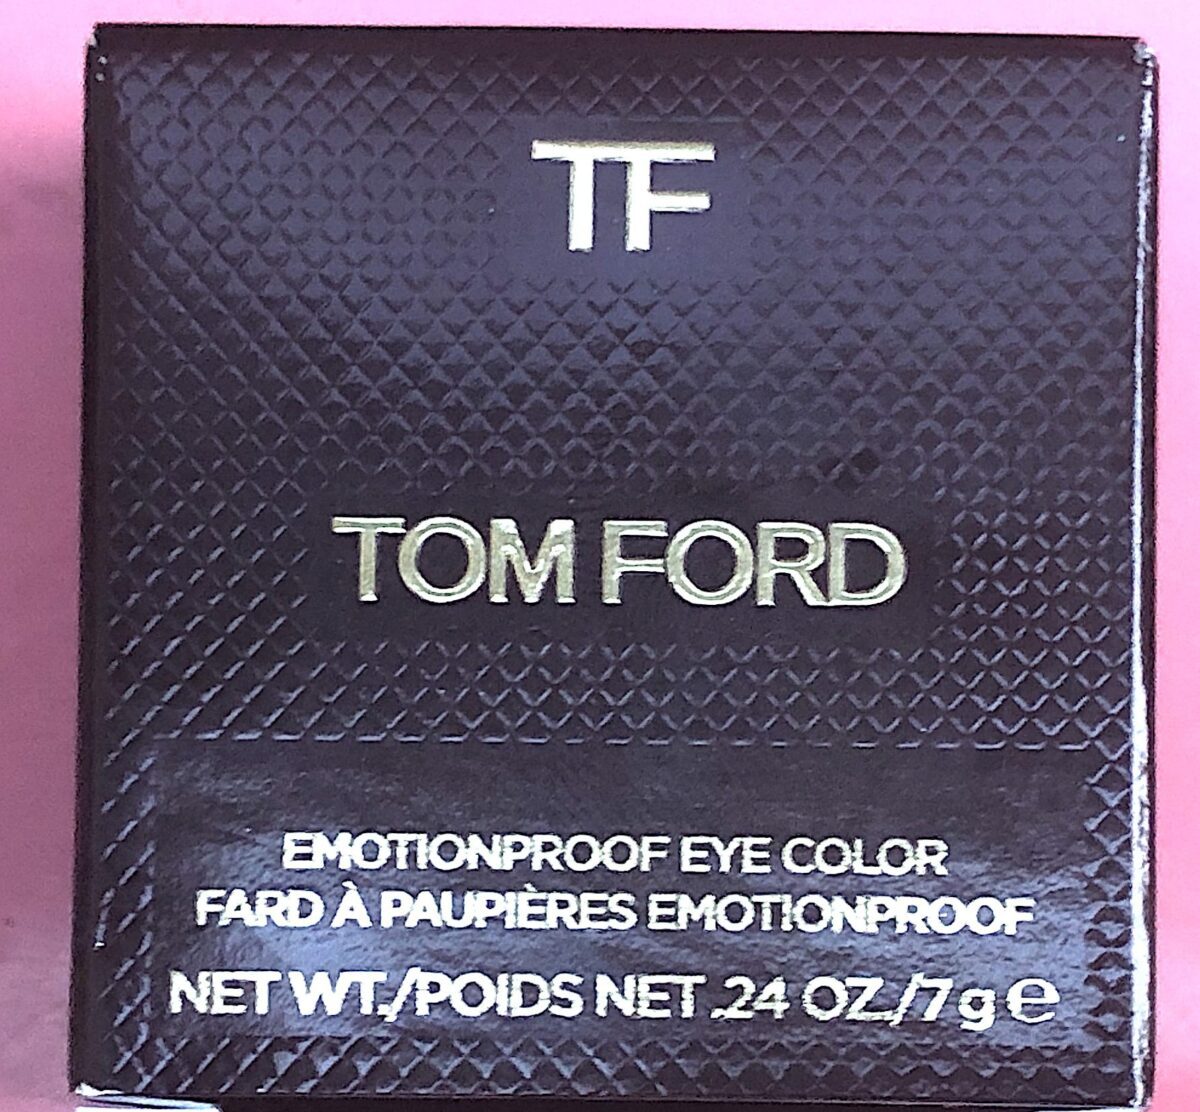 TOM FORD EMOTIONLESS EYE COLOR PACKAGING OUTER BOX